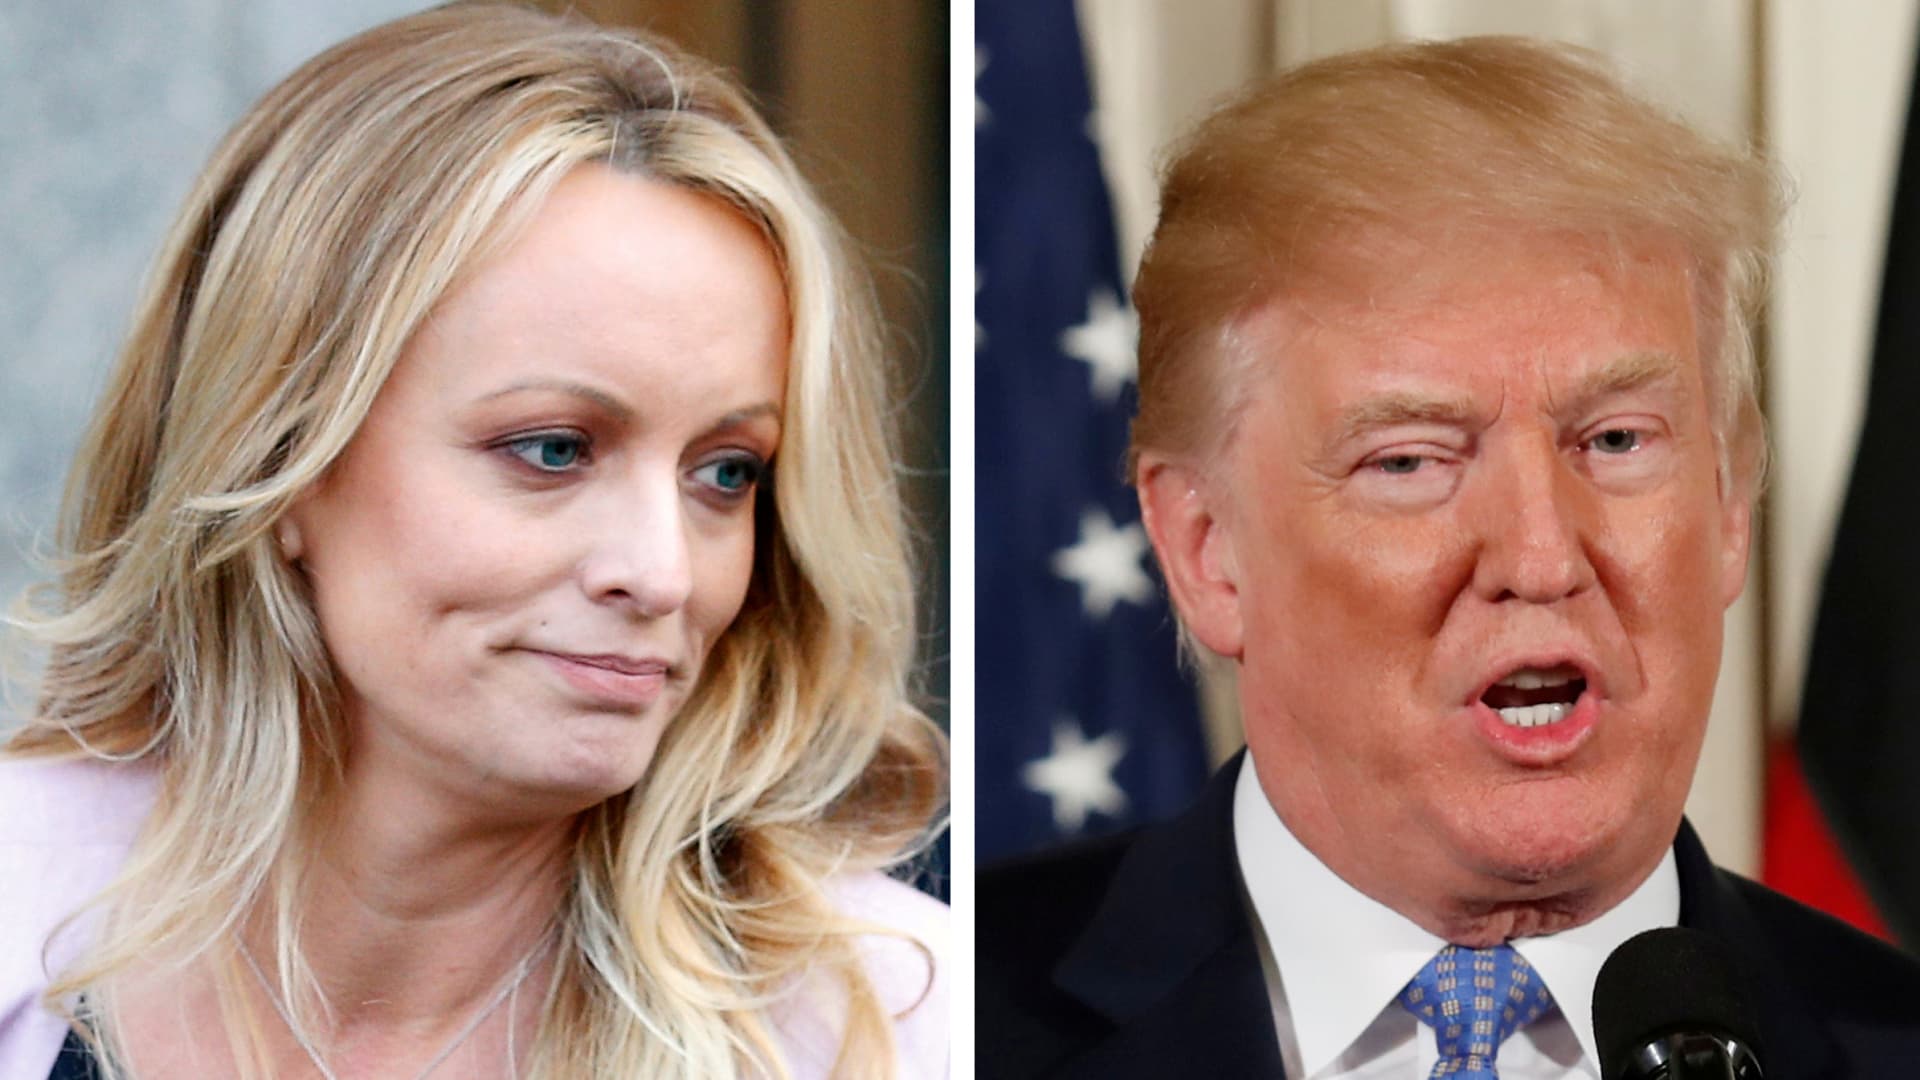 A combination photo shows Adult film actress Stephanie Clifford, also known as Stormy Daniels speaking in New York City, and U.S. President Donald Trump speaking in Washington, Michigan, U.S. on April 16, 2018 and April 28, 2018 respectively.